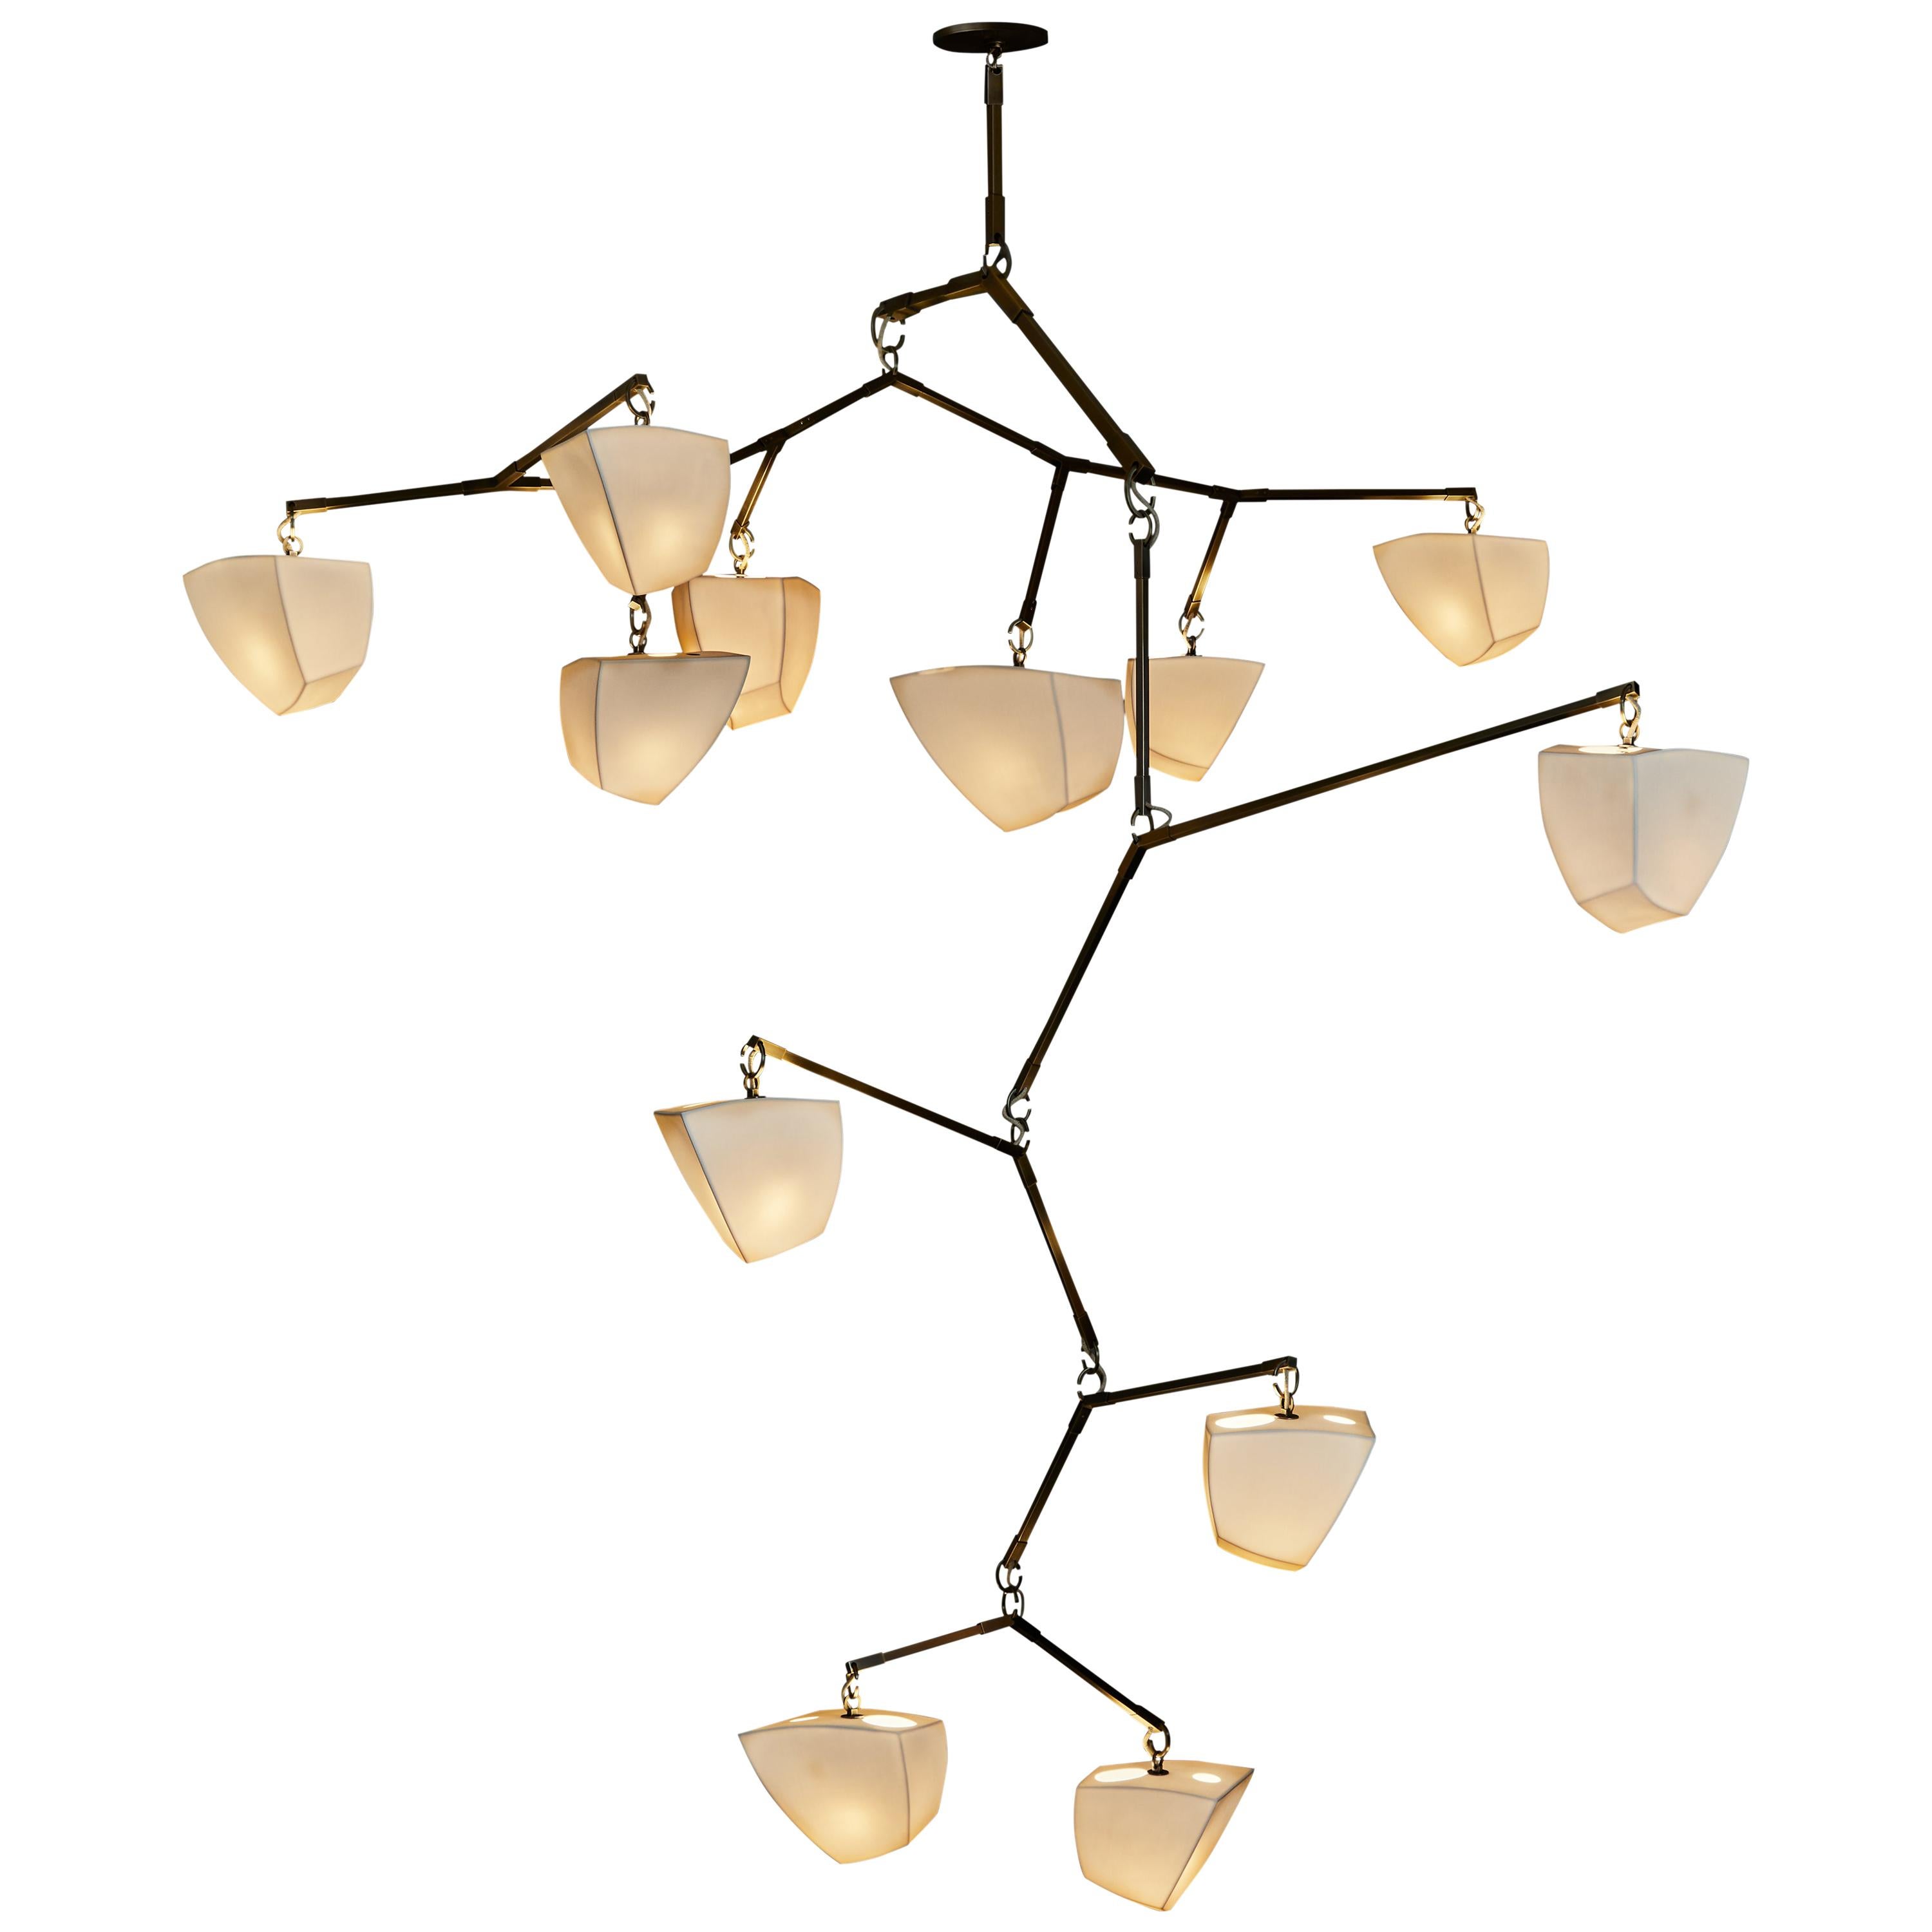 Galaxy 12: Porcelain Mobile Chandelier is a large mobile chandelier with twelve handmade translucent porcelain polyhedron shades in 2 sizes. 

This configuration was designed to float horizontally and vertically extending in two directions and